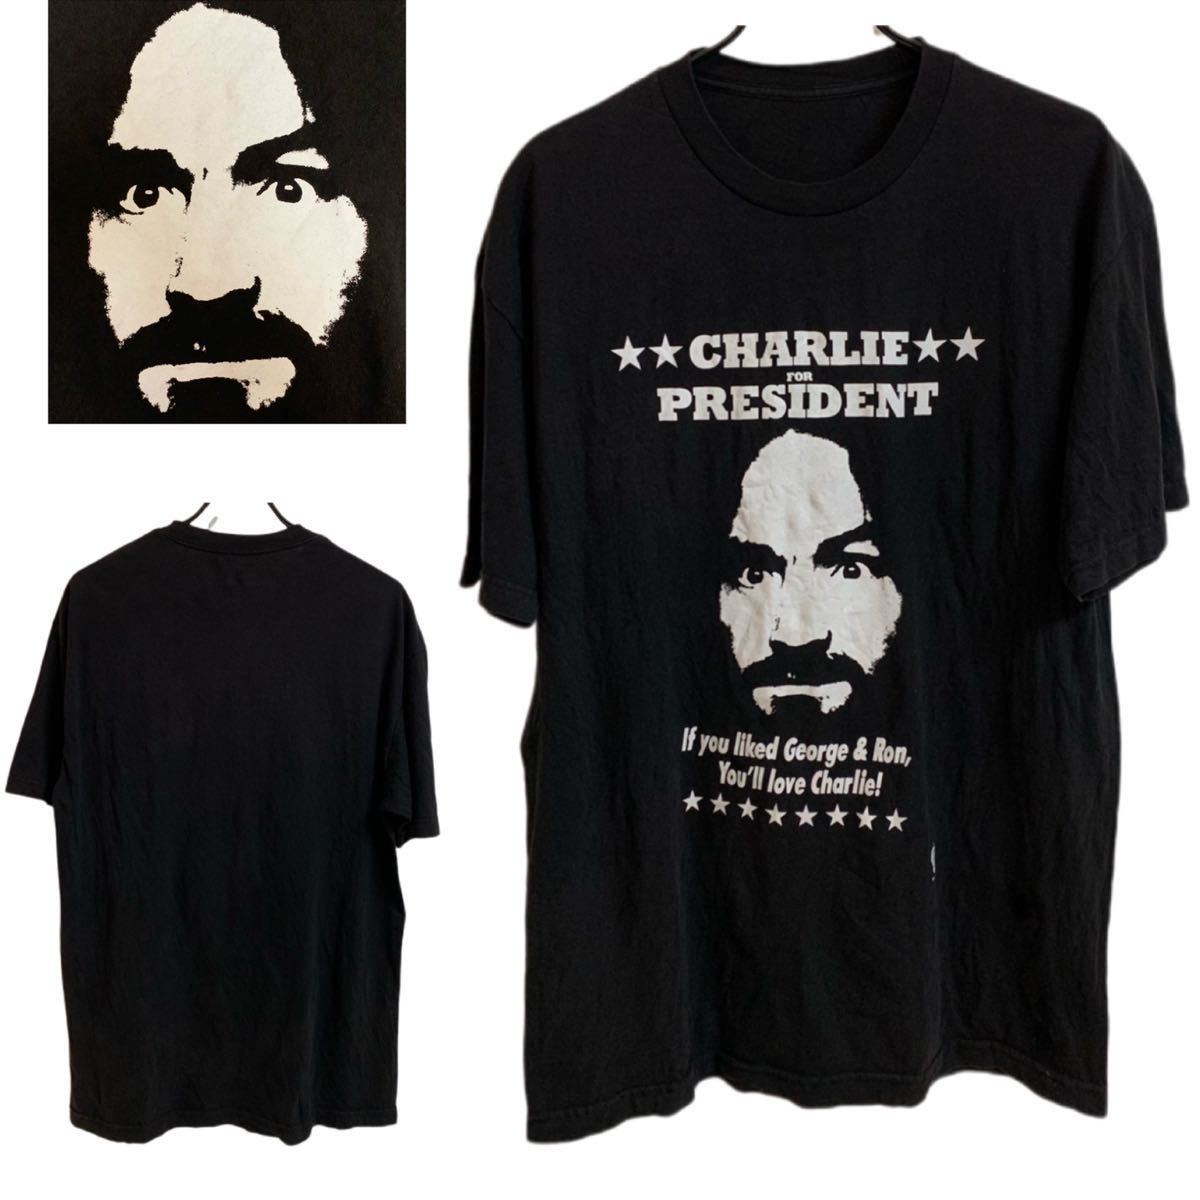 Charles Manson チャールズ・マンソン CHARLIE FOR PRESIDENT If you liked George & Ron, You'll love Charlie! Tシャツ BLACK アーカイブ